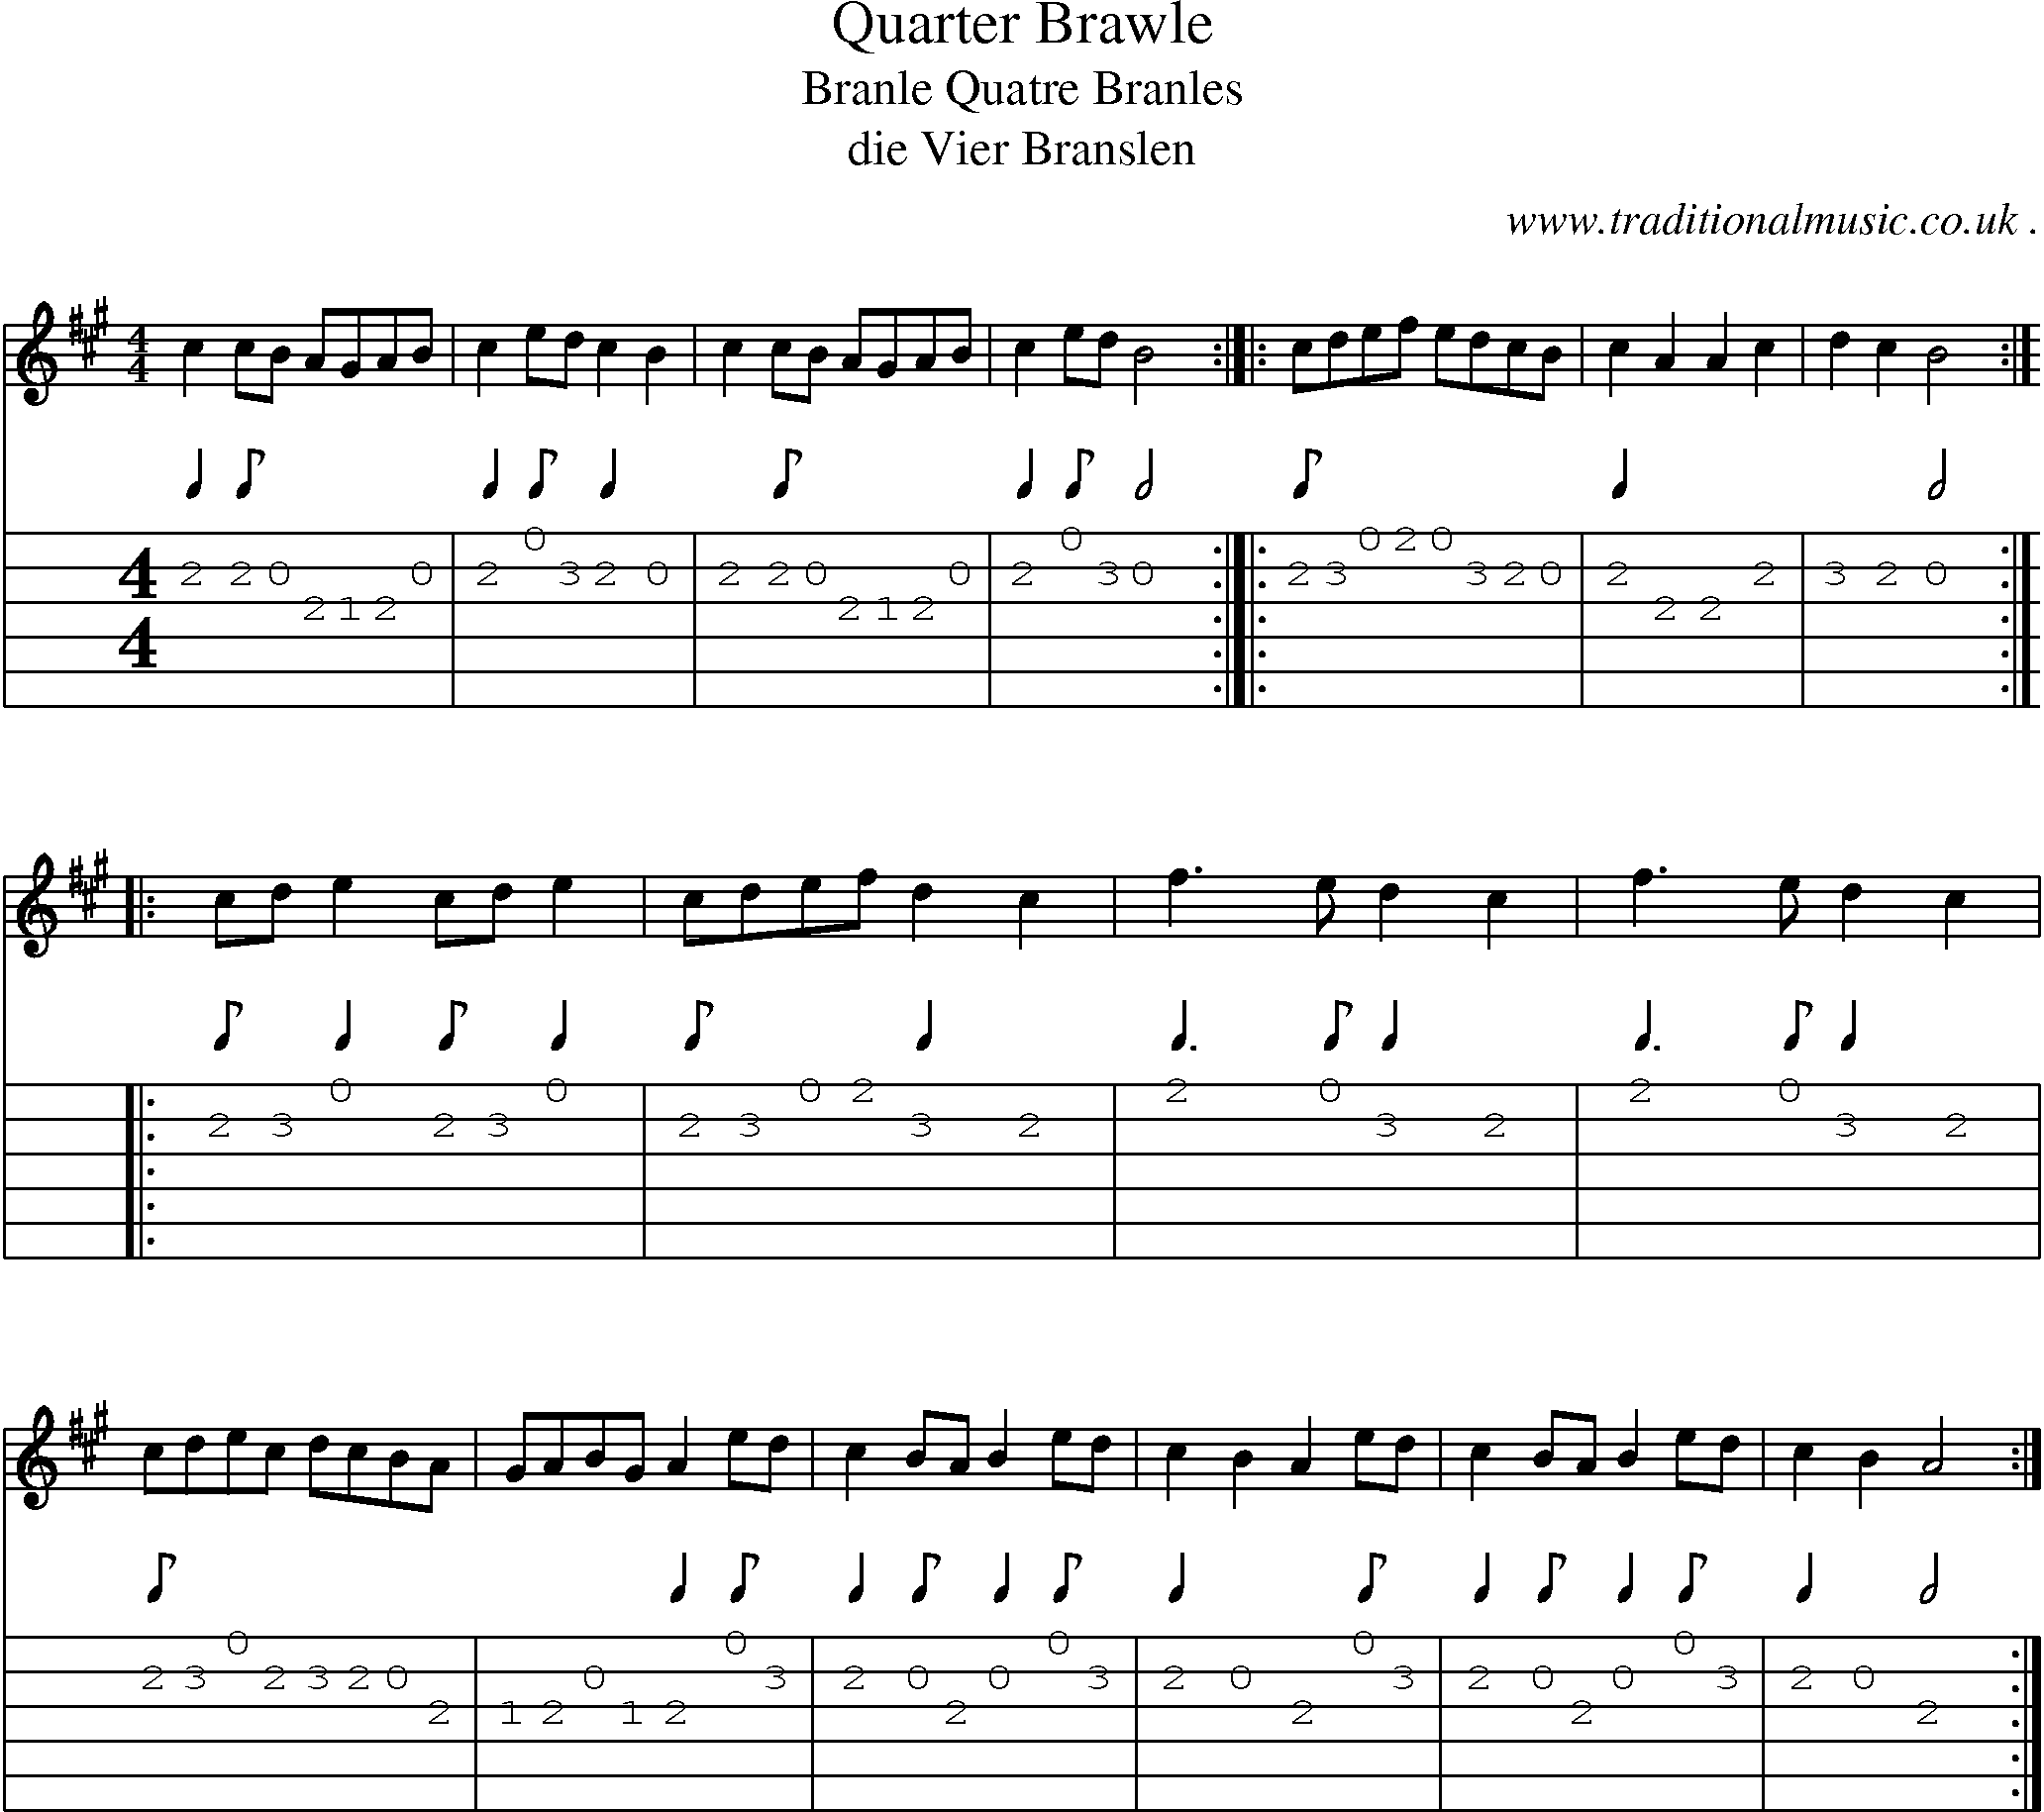 Sheet-Music and Guitar Tabs for Quarter Brawle